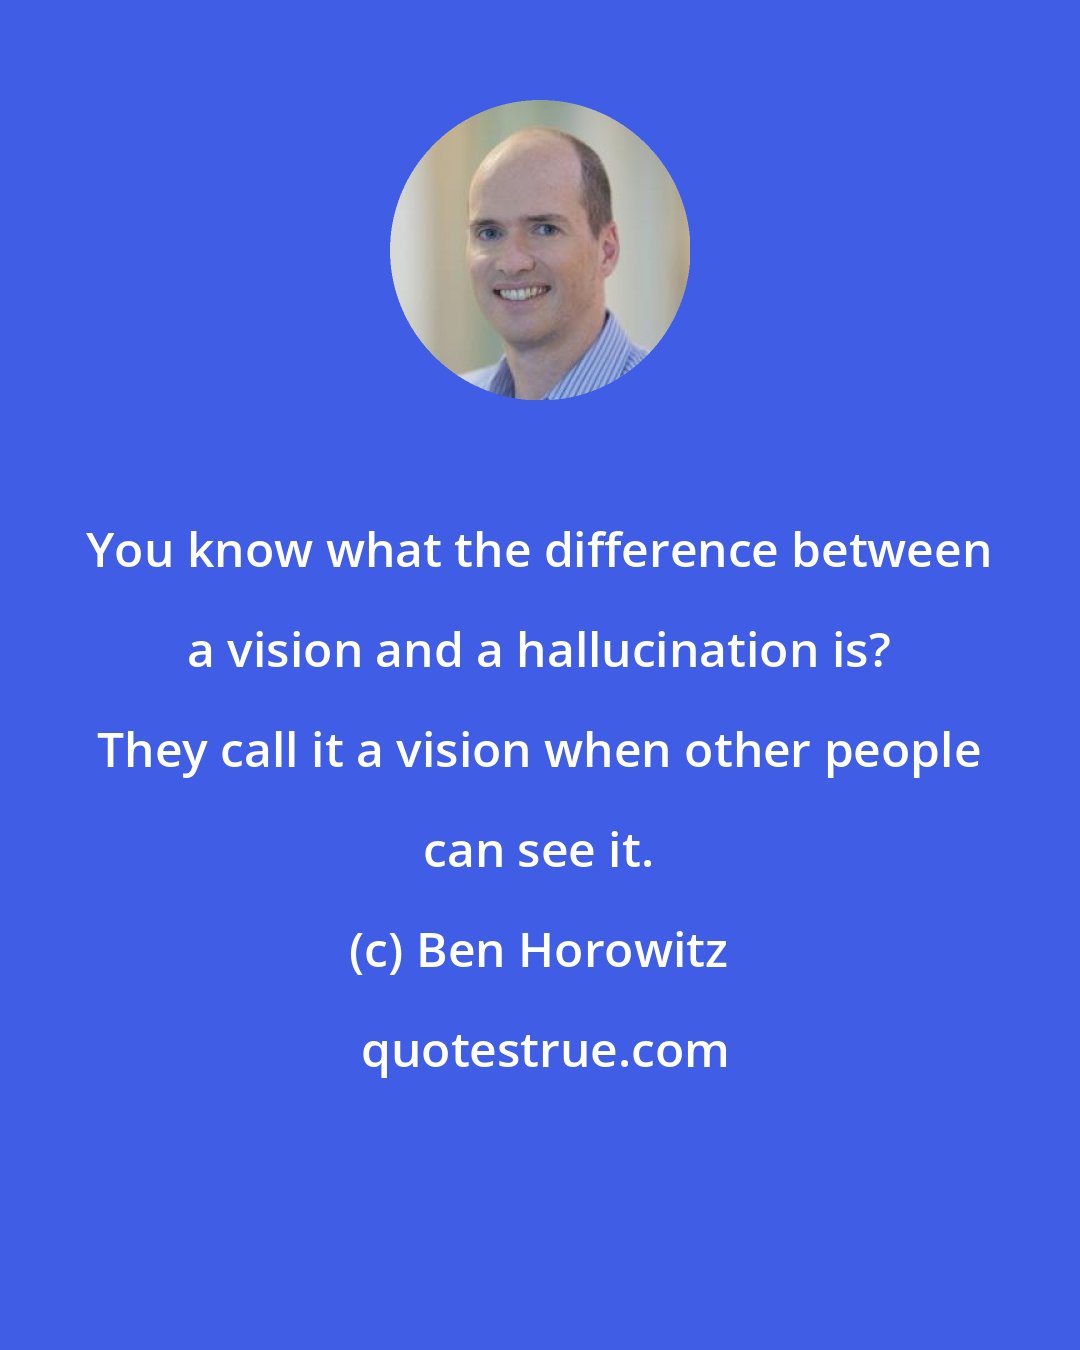 Ben Horowitz: You know what the difference between a vision and a hallucination is? They call it a vision when other people can see it.